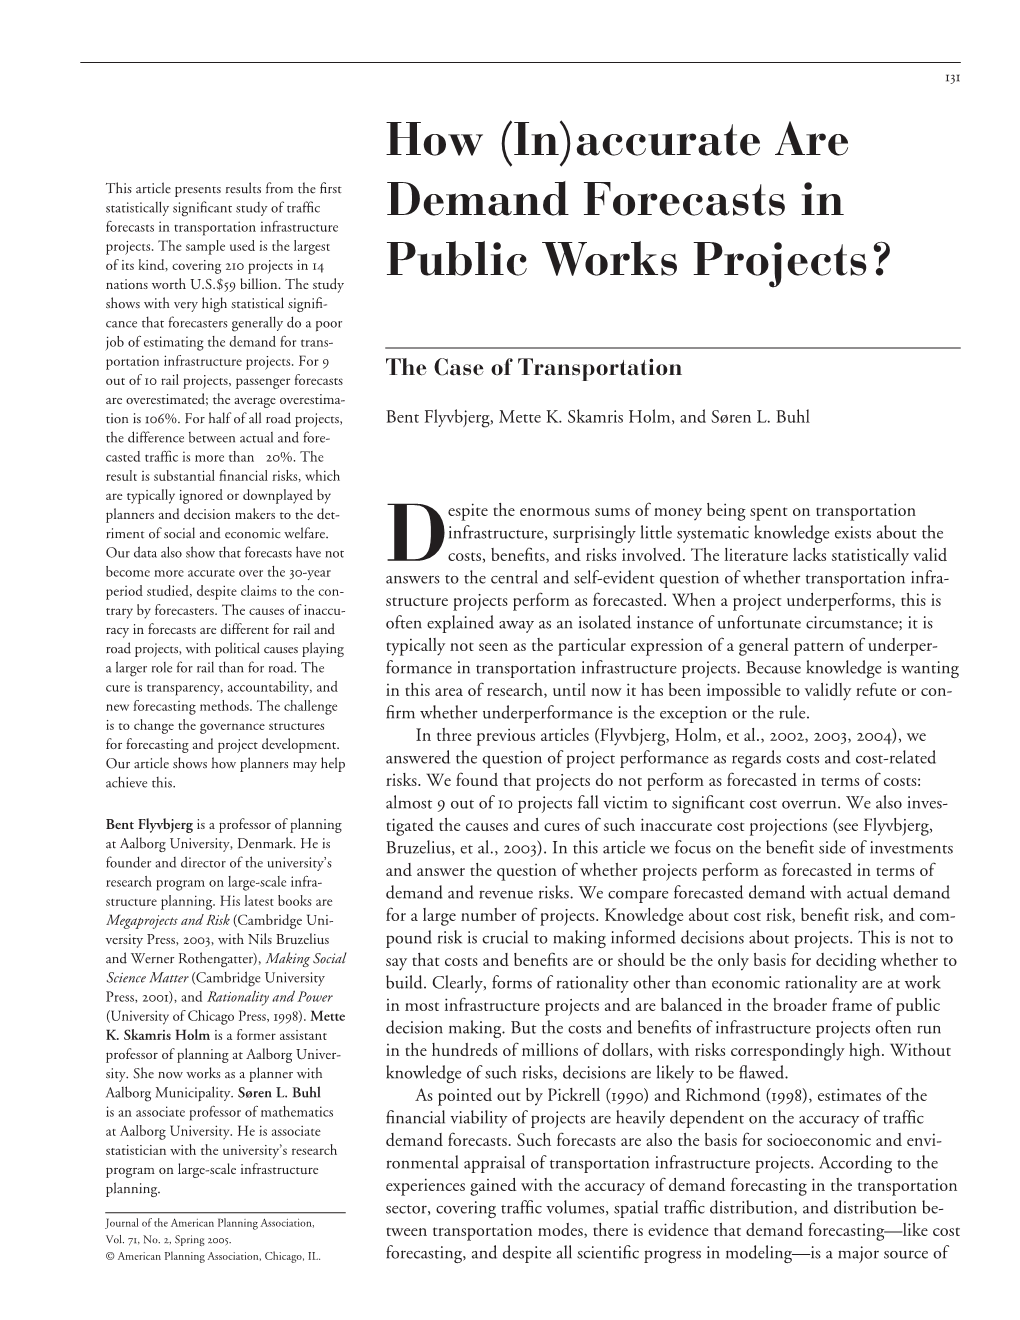 How (In)Accurate Are Demand Forecasts in Public Works Projects?  Forecasted Trafﬁc